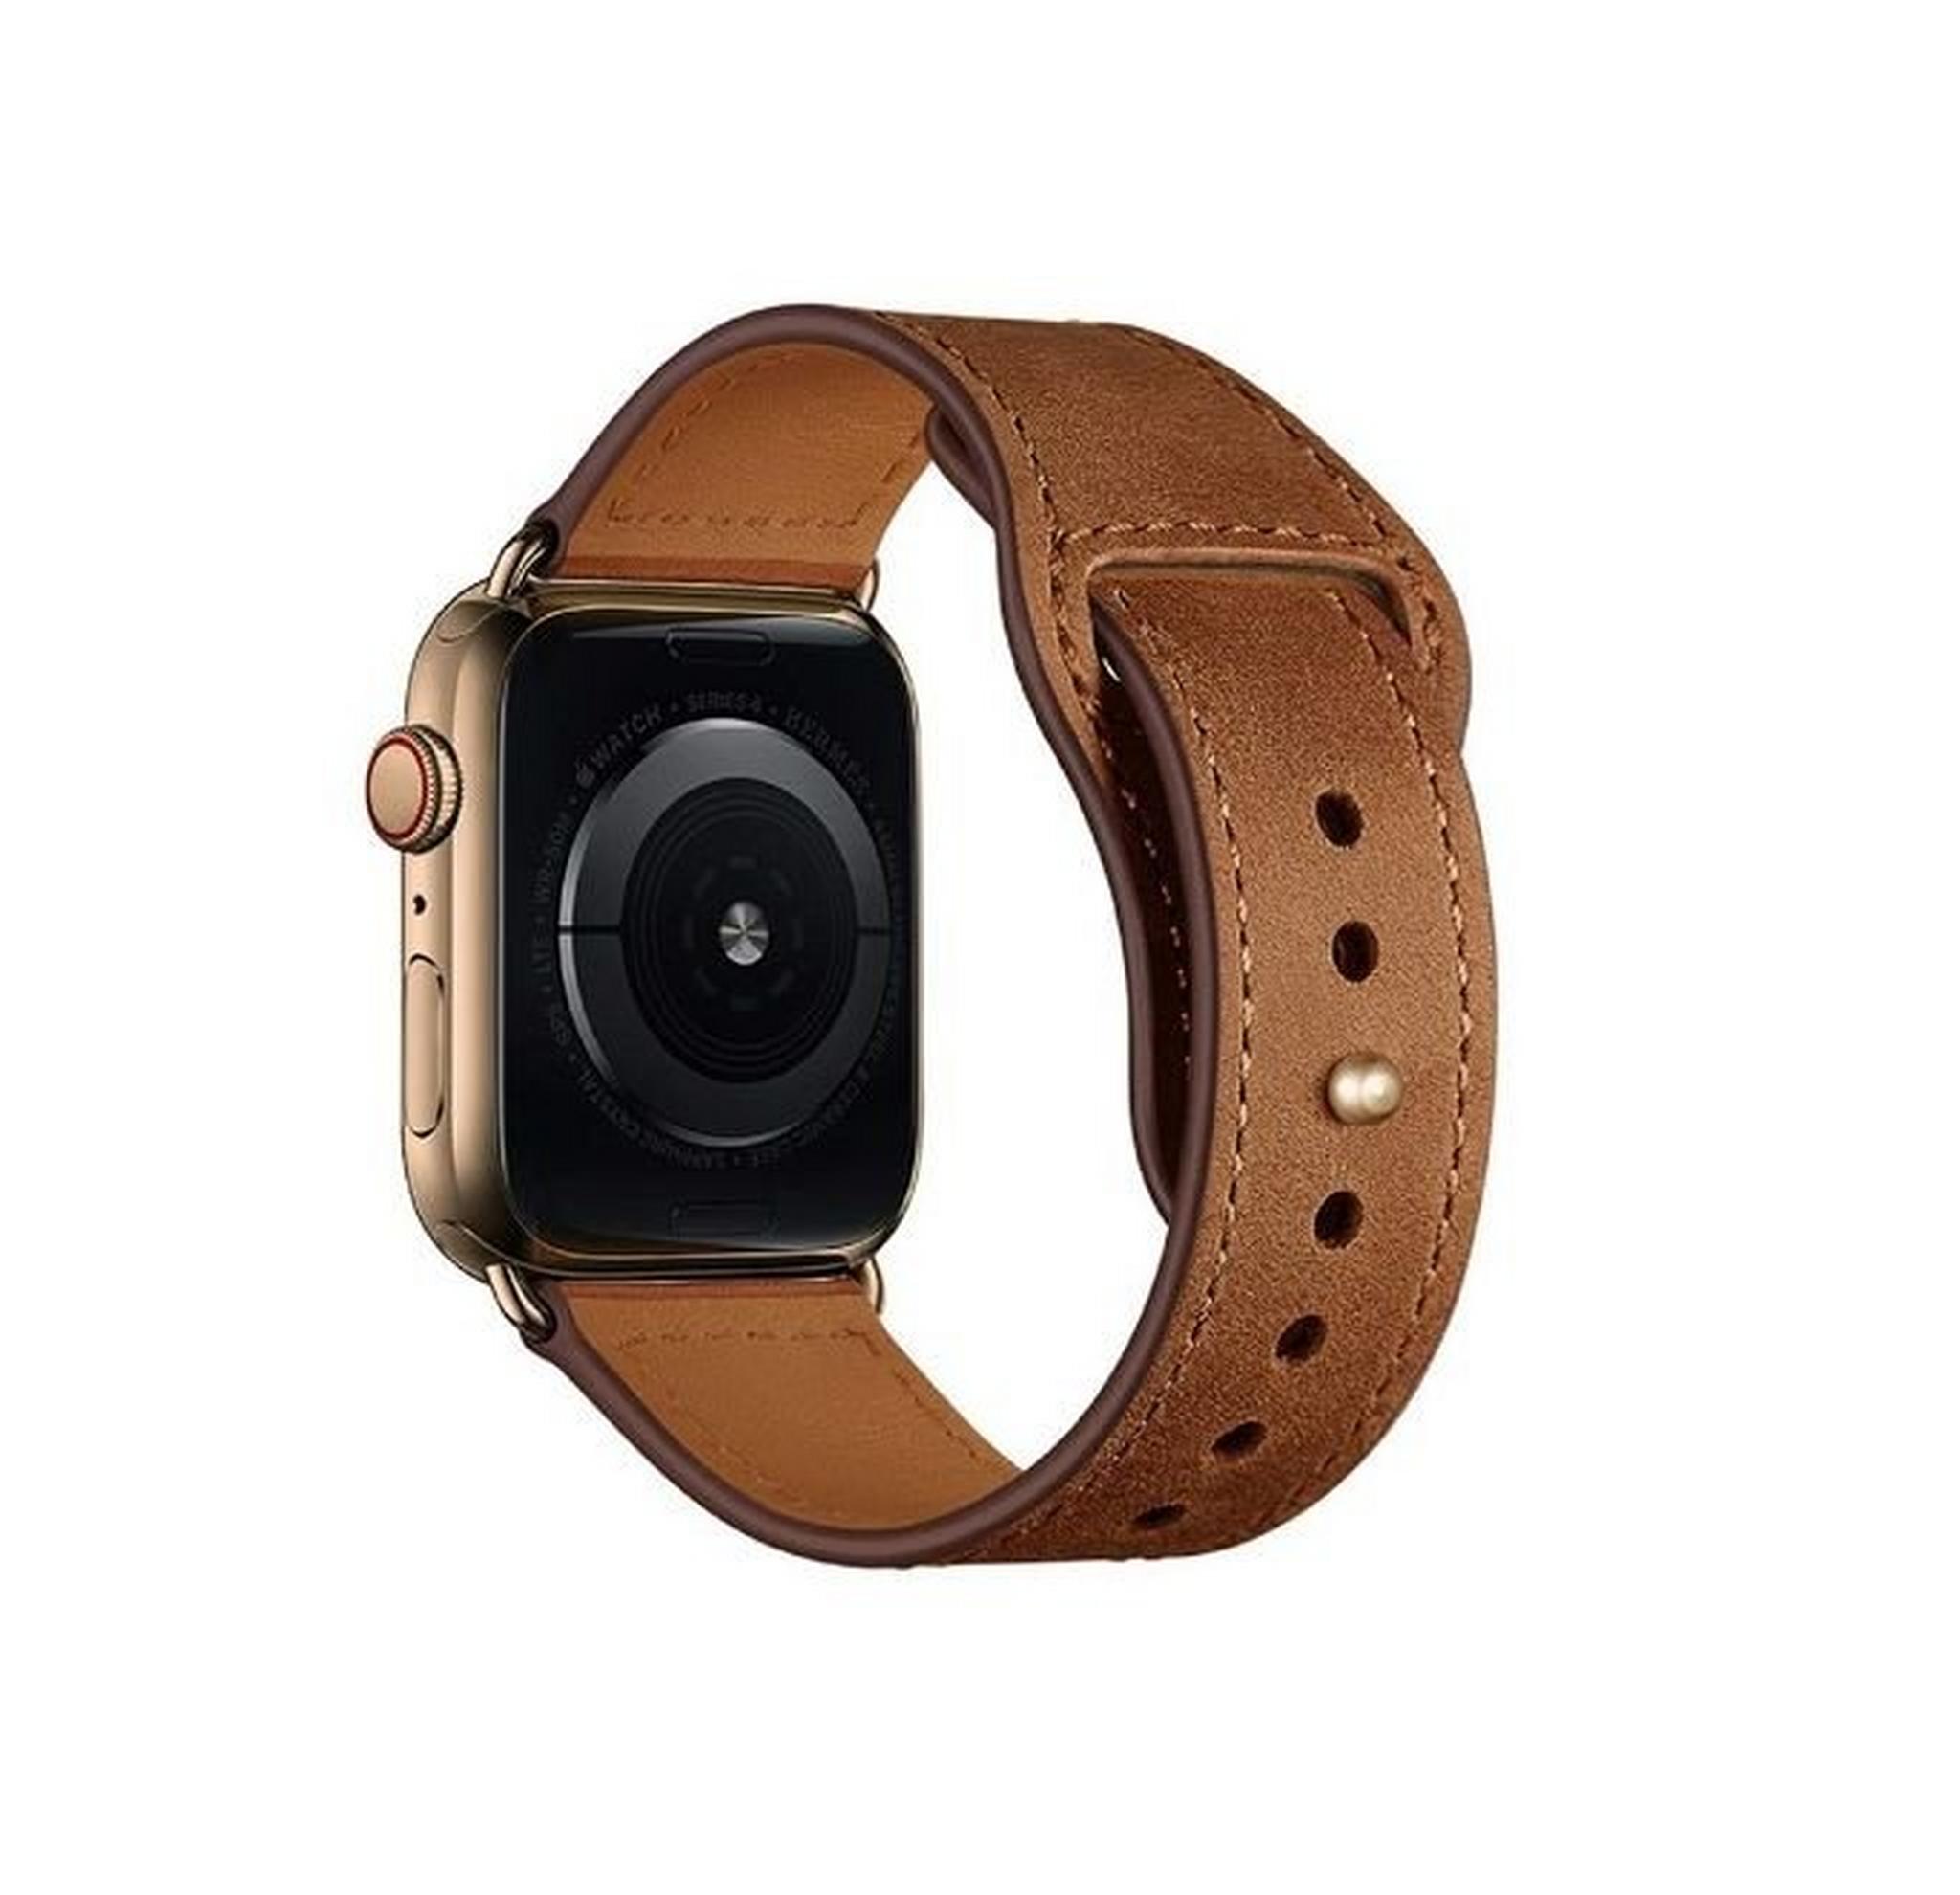 Promate Leather Strap For 42mm Apple Watch - Brown